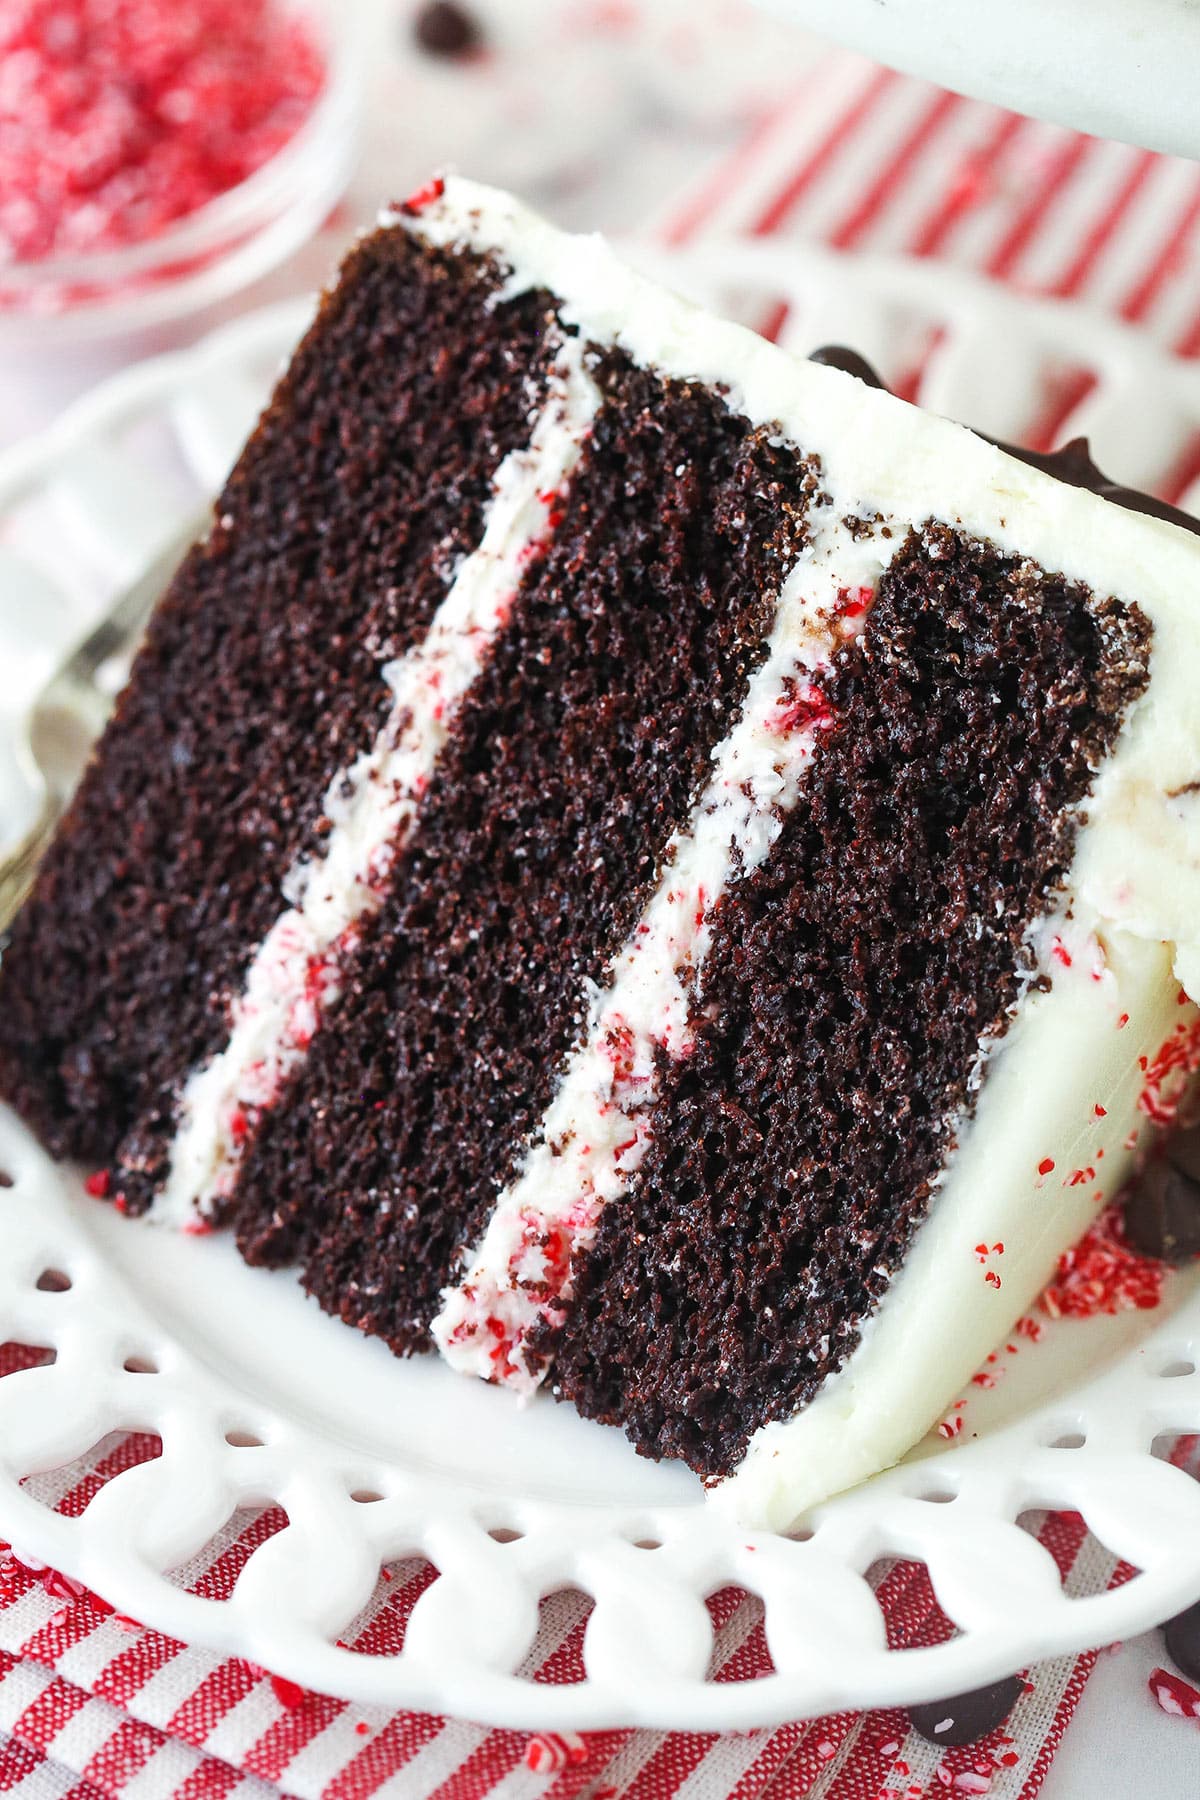 A slice of chocolate peppermint layer cake on a plate.